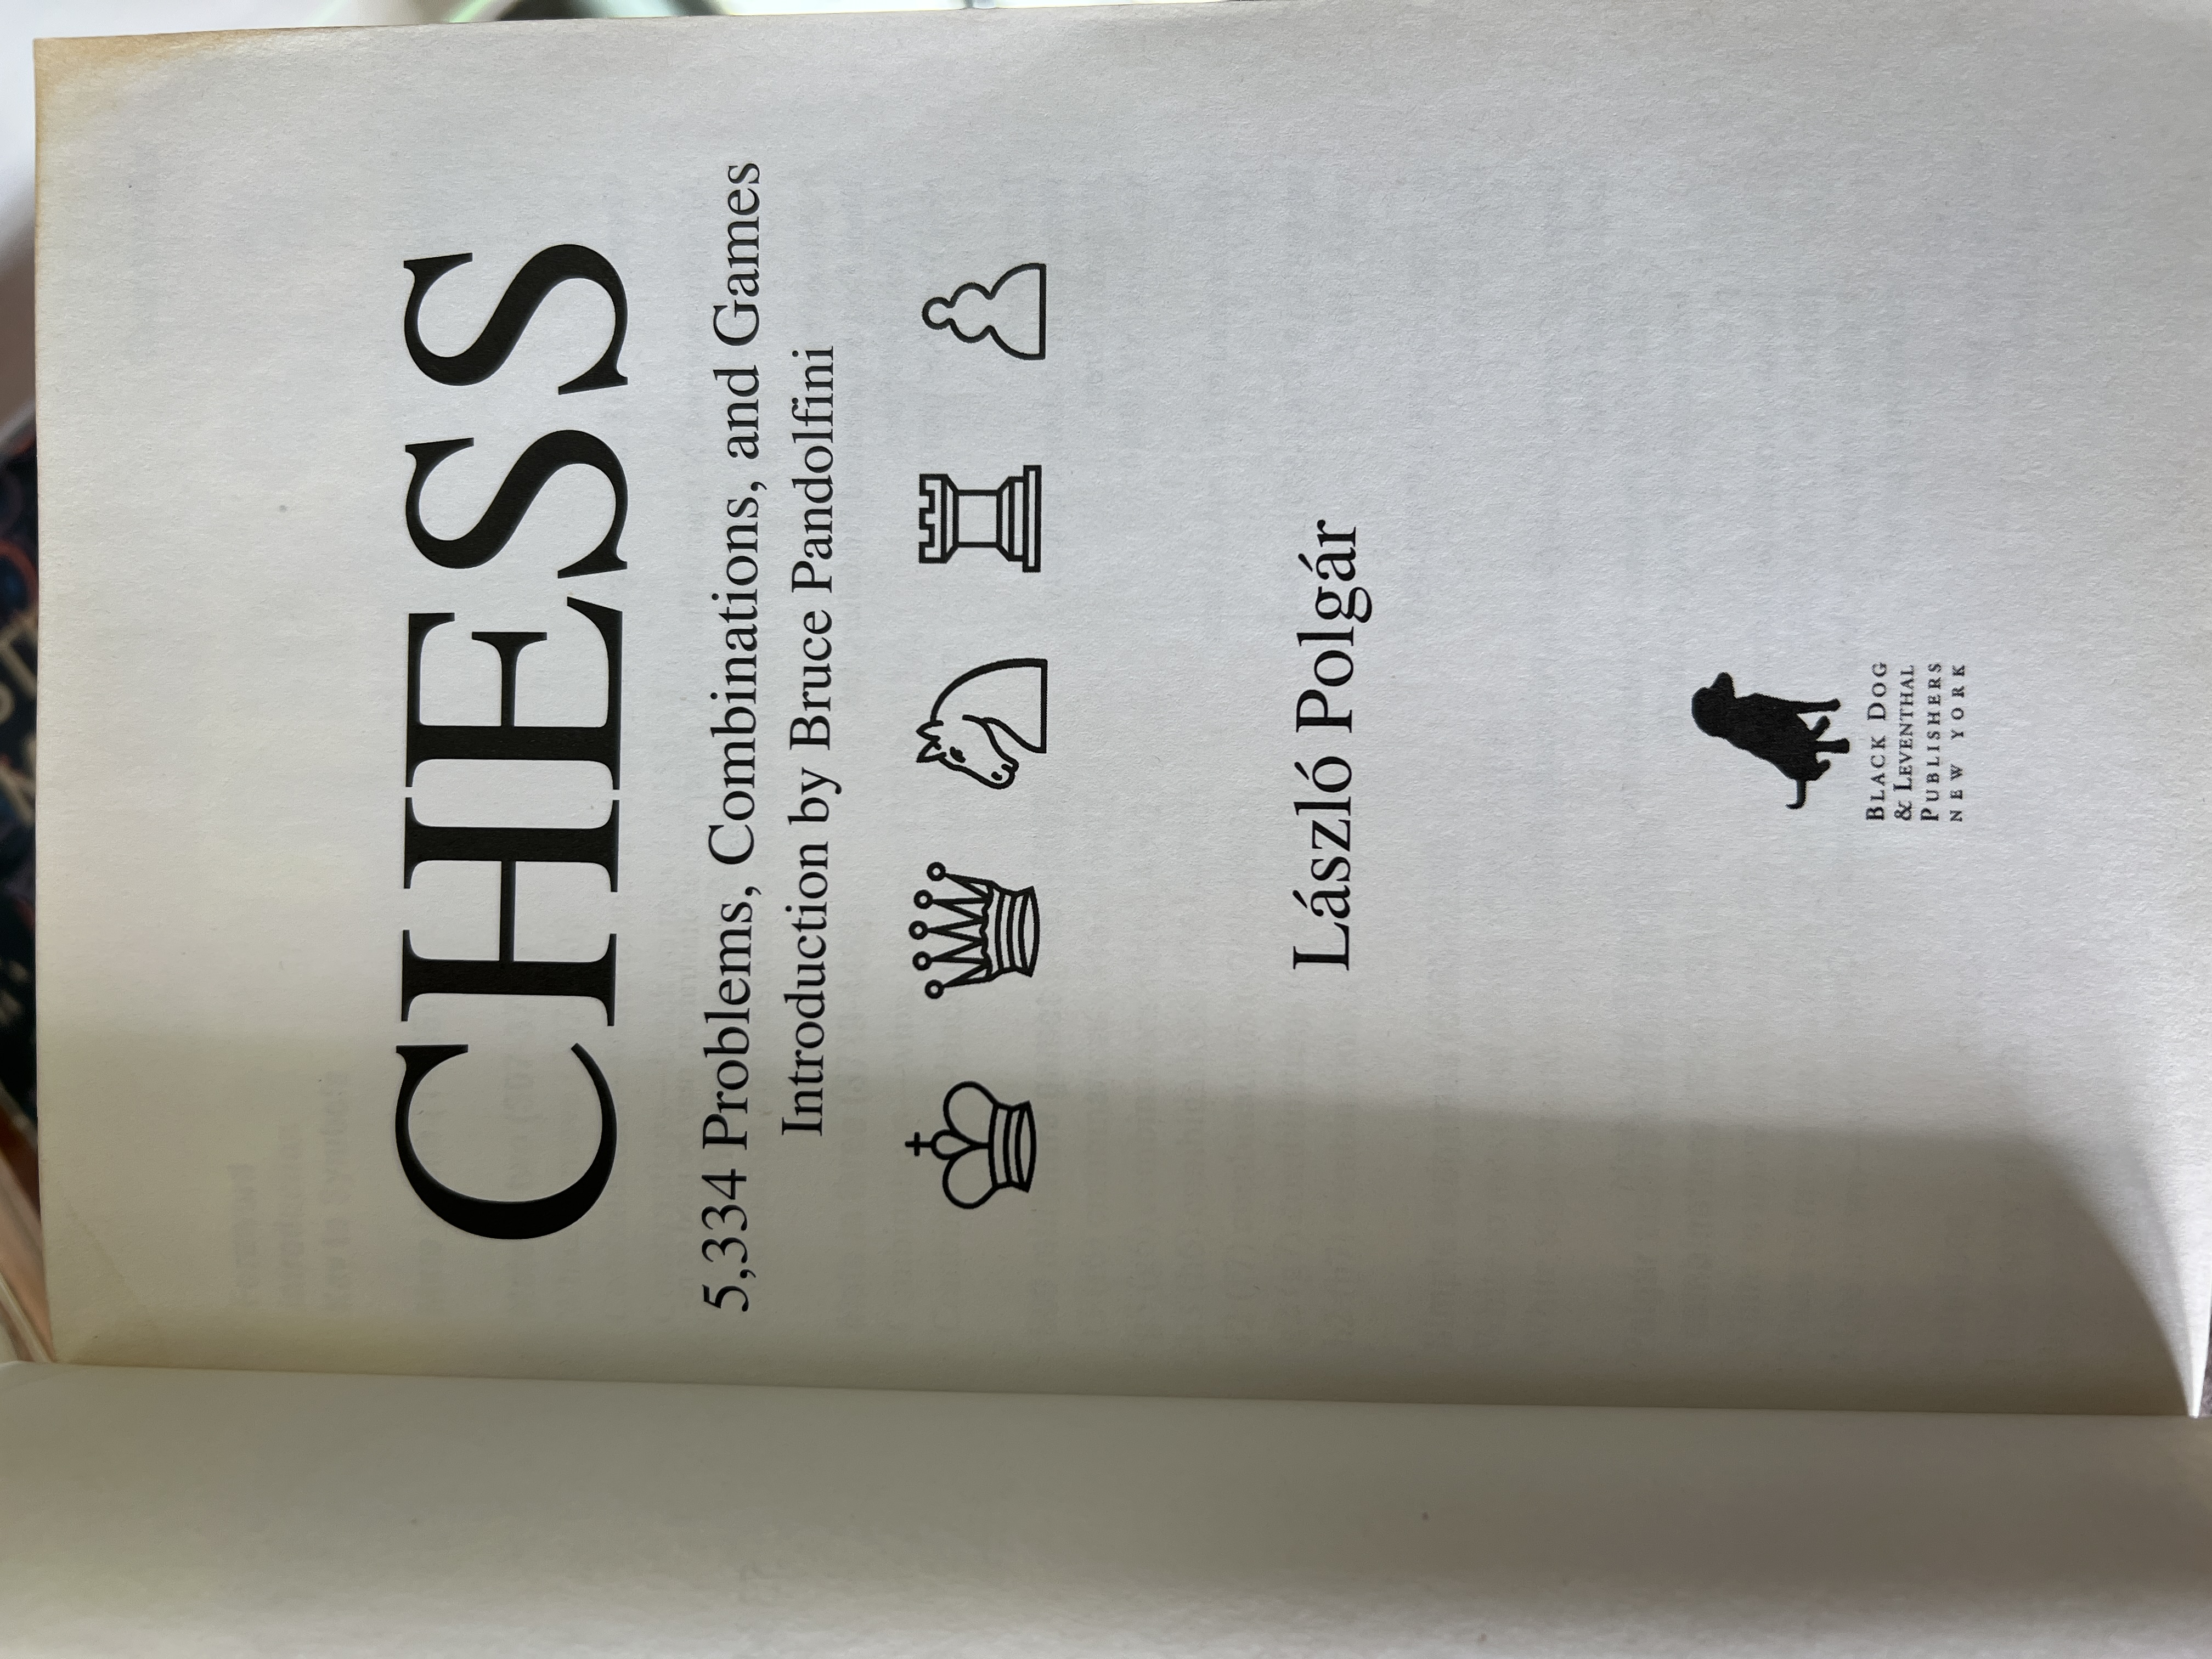 Bestseller Books Online Chess: 5334 Problems, Combinations and Games Laszlo  Polgar $15.61 